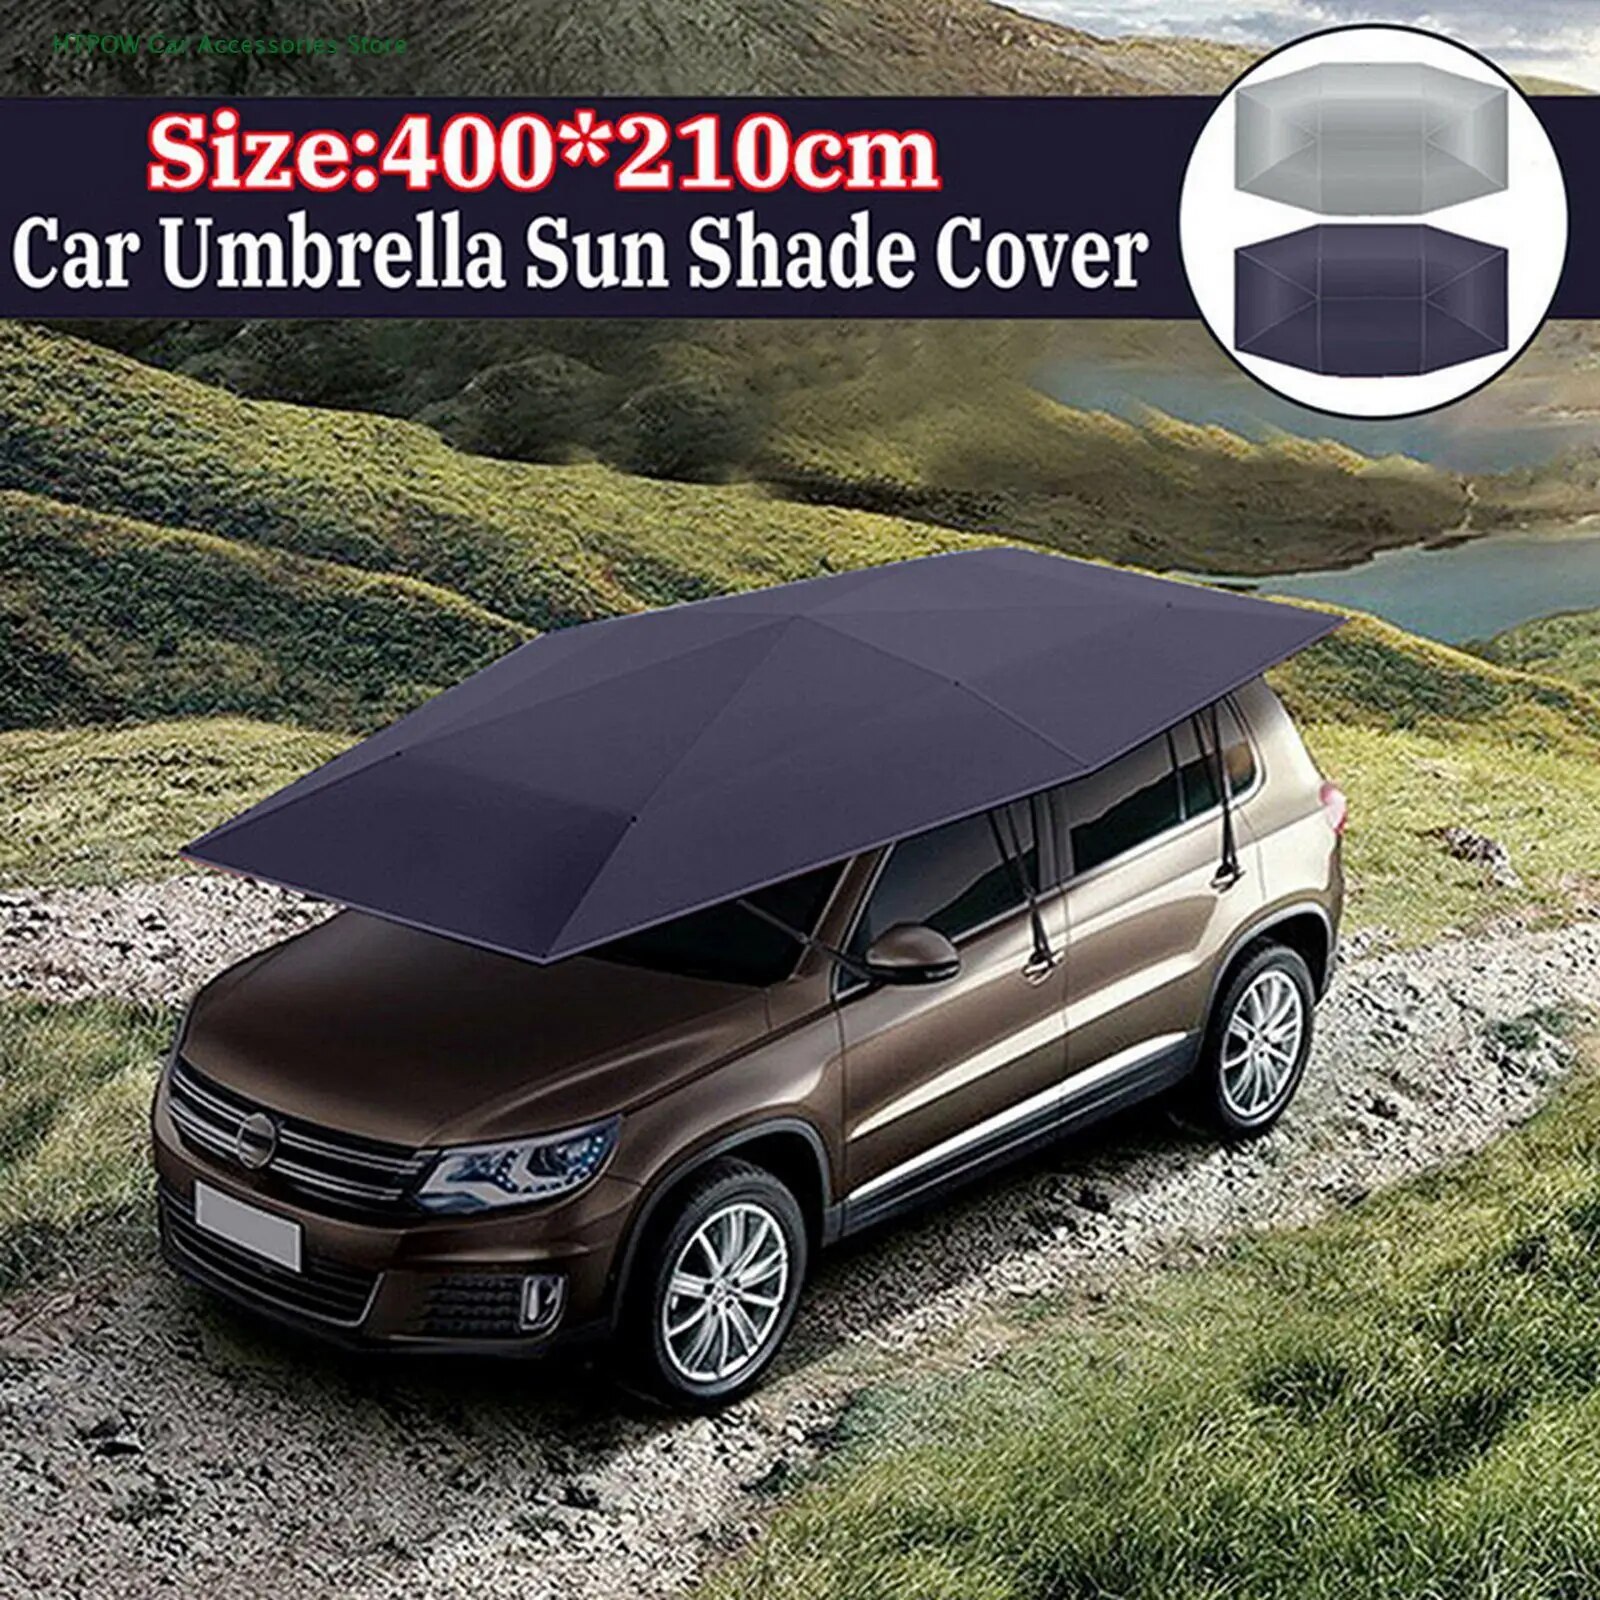 Car Summer Sunshade Umbrella Portable Anti-UV Protection Roof Cover Summer Sunscreen Shed 400*210cm 